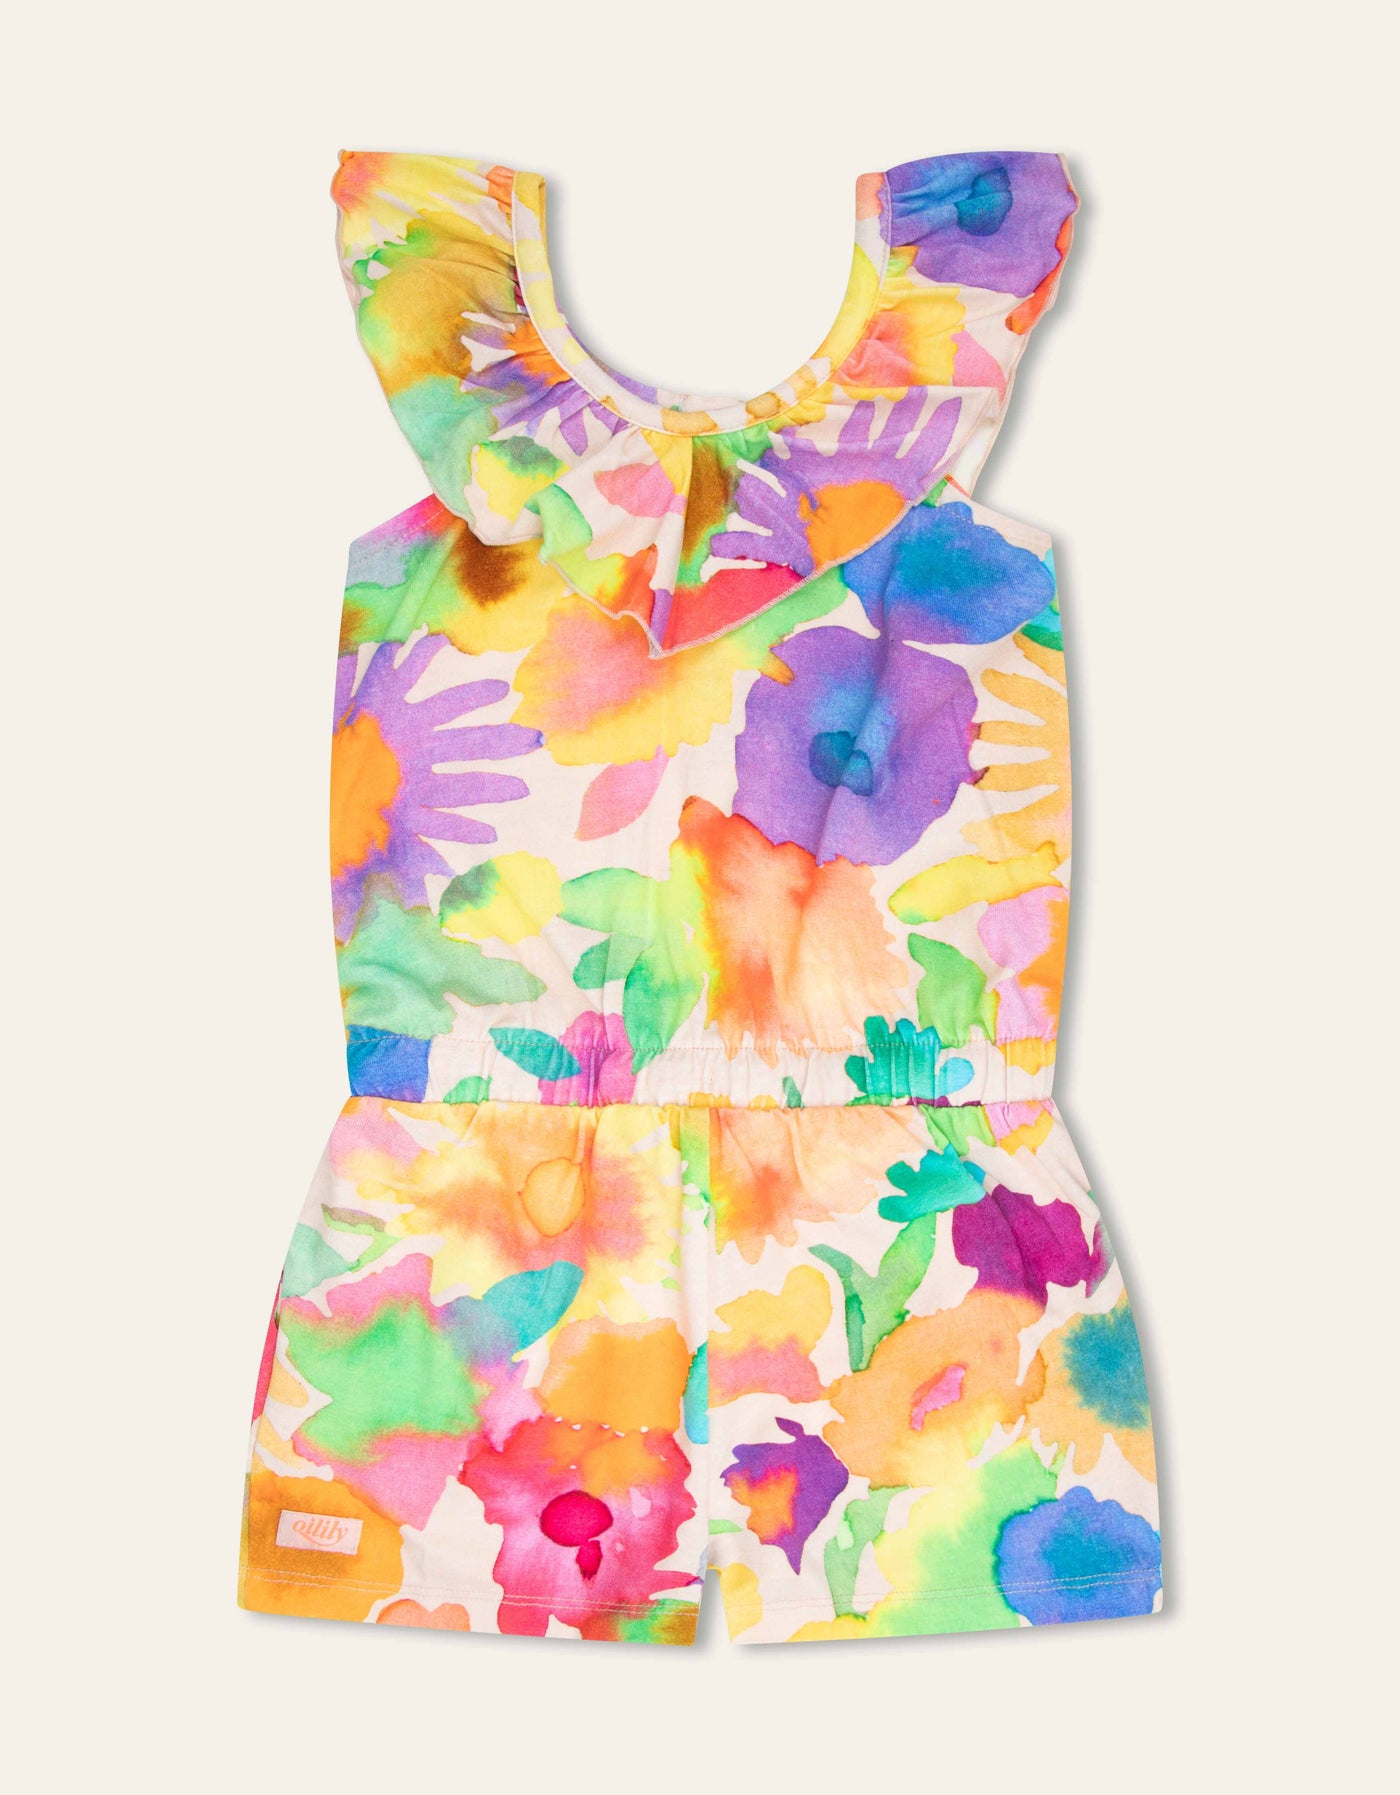 Inky Flowers Playsuit by Oilily